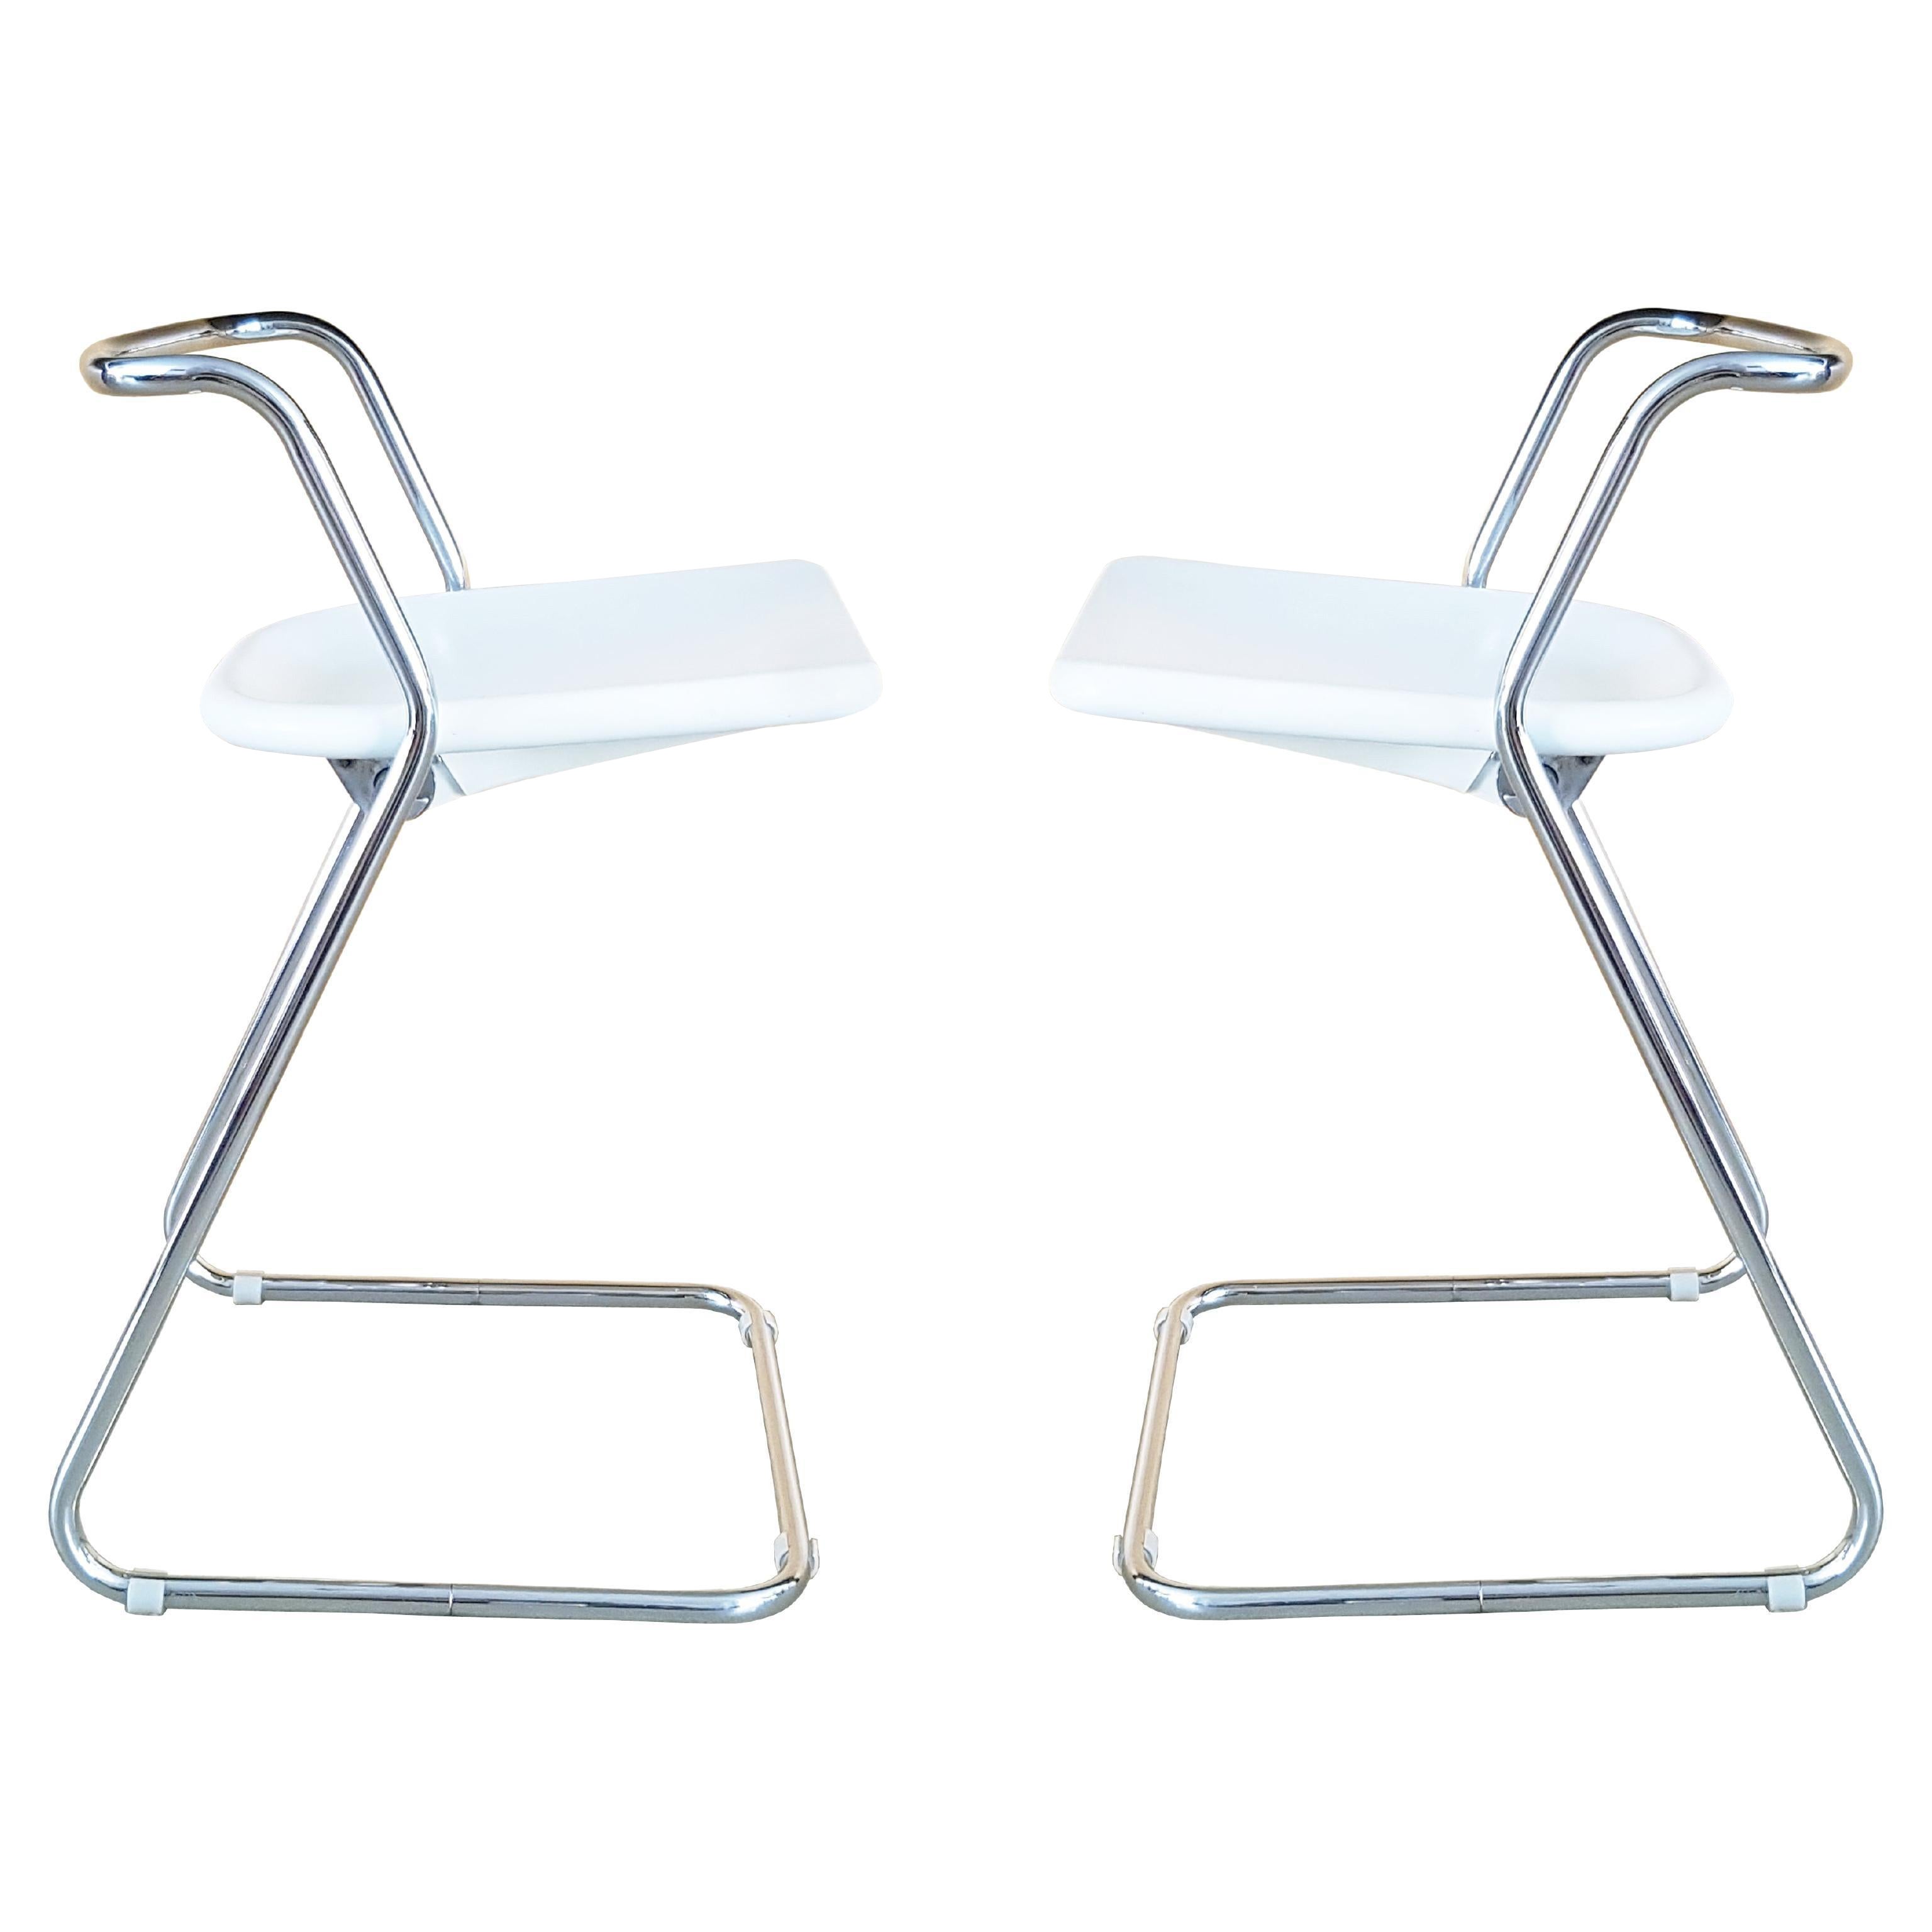 White Plastic & Chrome Plated Metal 1970s Stools by C. Salocchi for Alberti For Sale